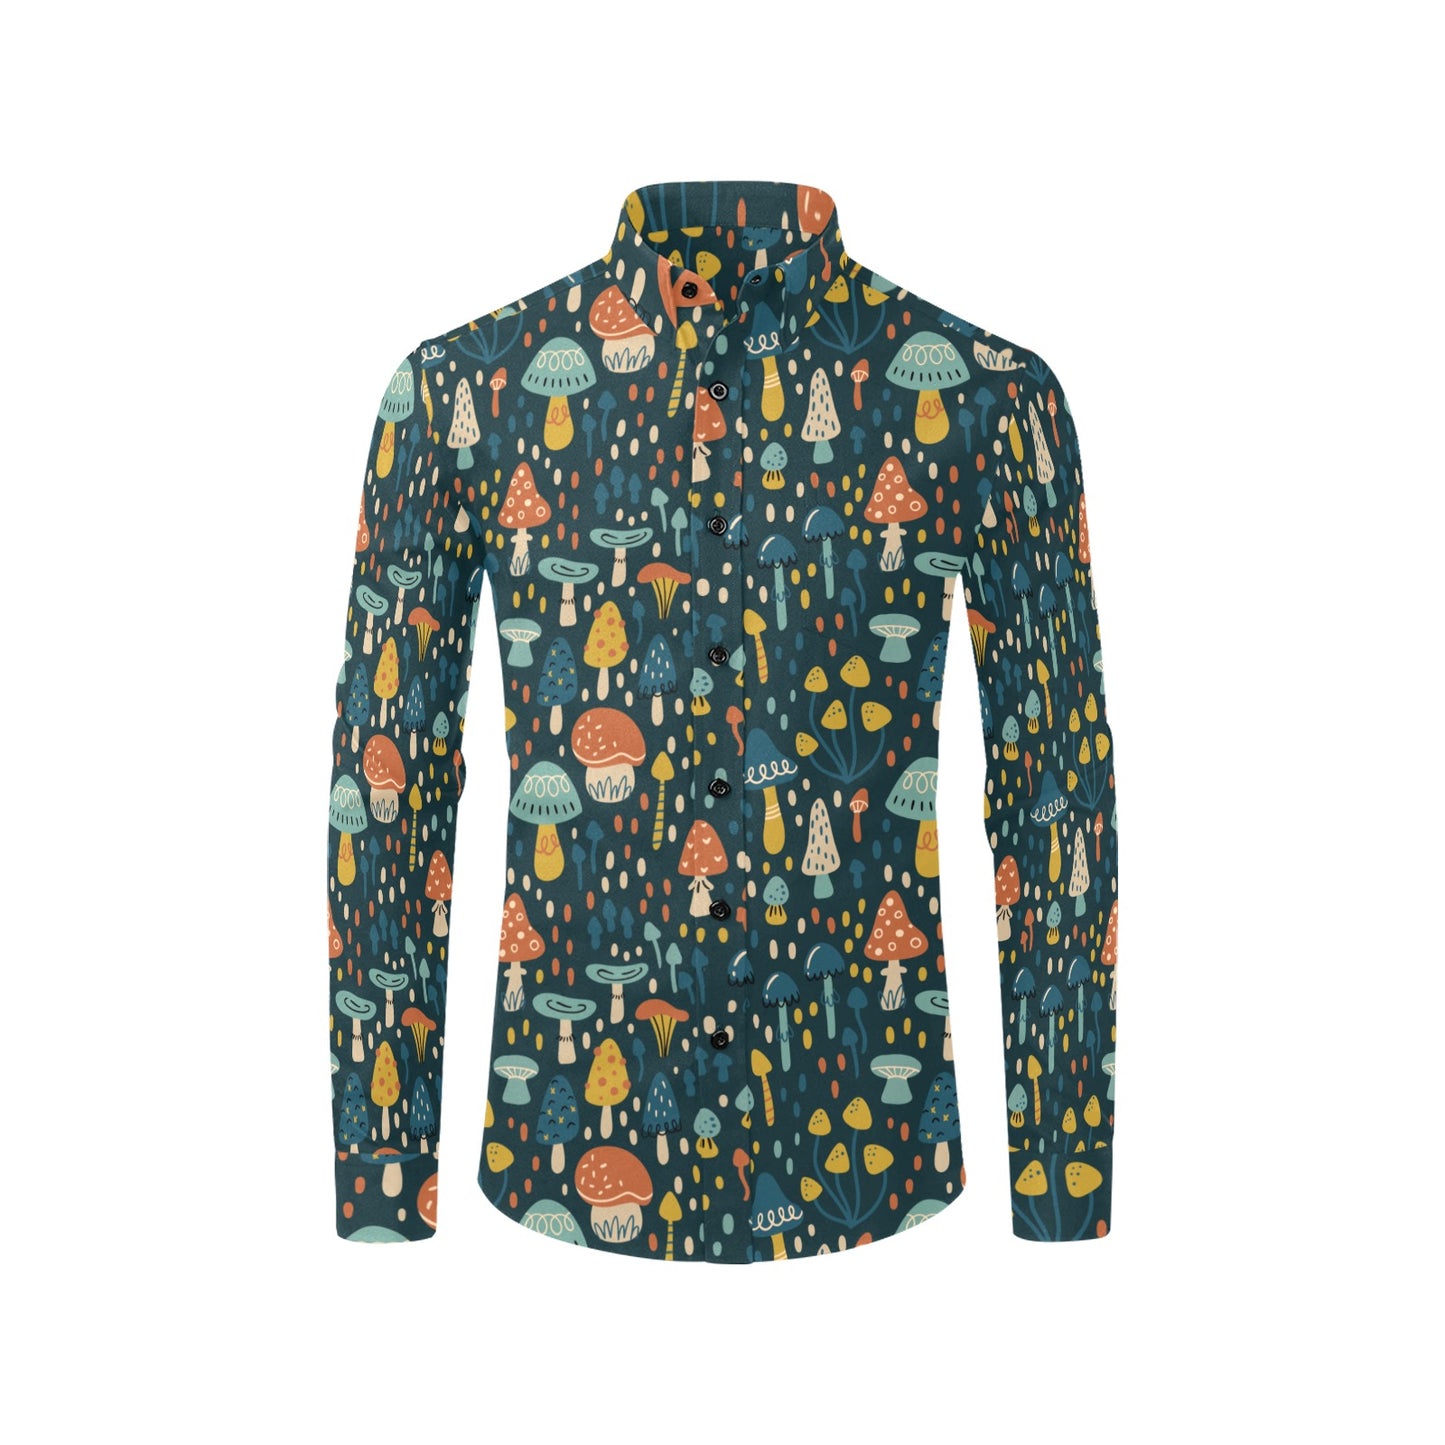 Green Mushroom Men Button Up Shirt, Long Sleeve Floral Nature Forest Cottagecore Print Casual Buttoned Collared Dress Shirt Chest Pocket